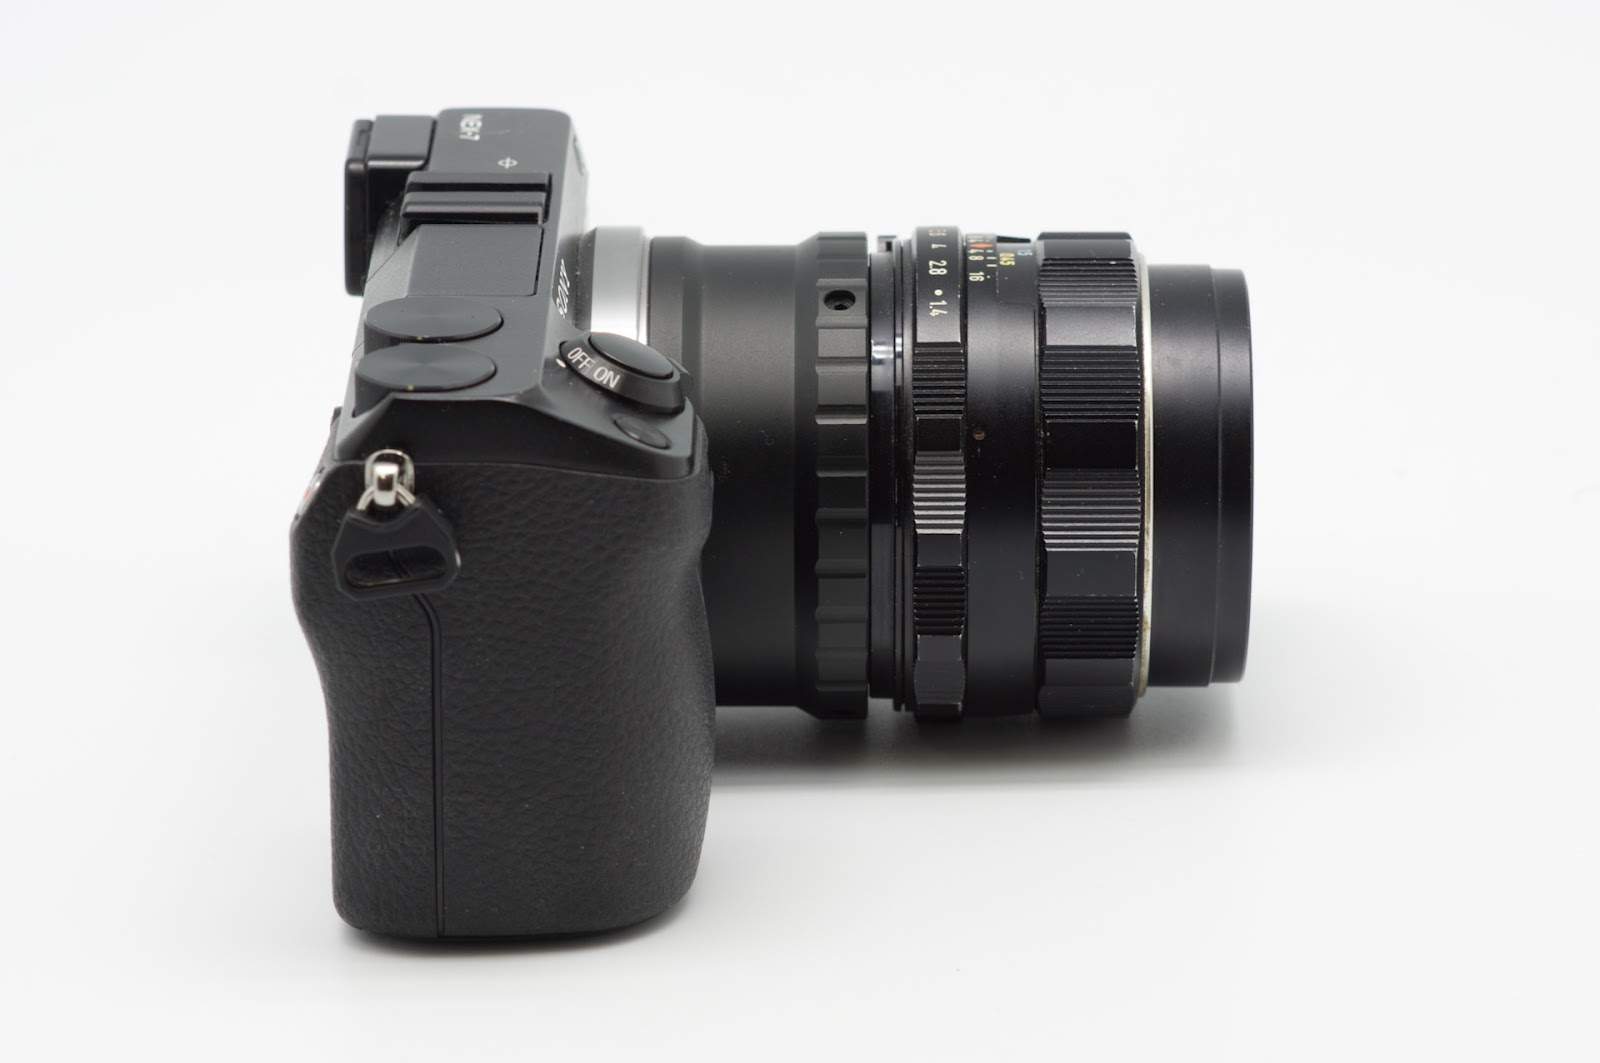 Asahi Super Takumar  f1.4 – Legacy mm. Which one is the best